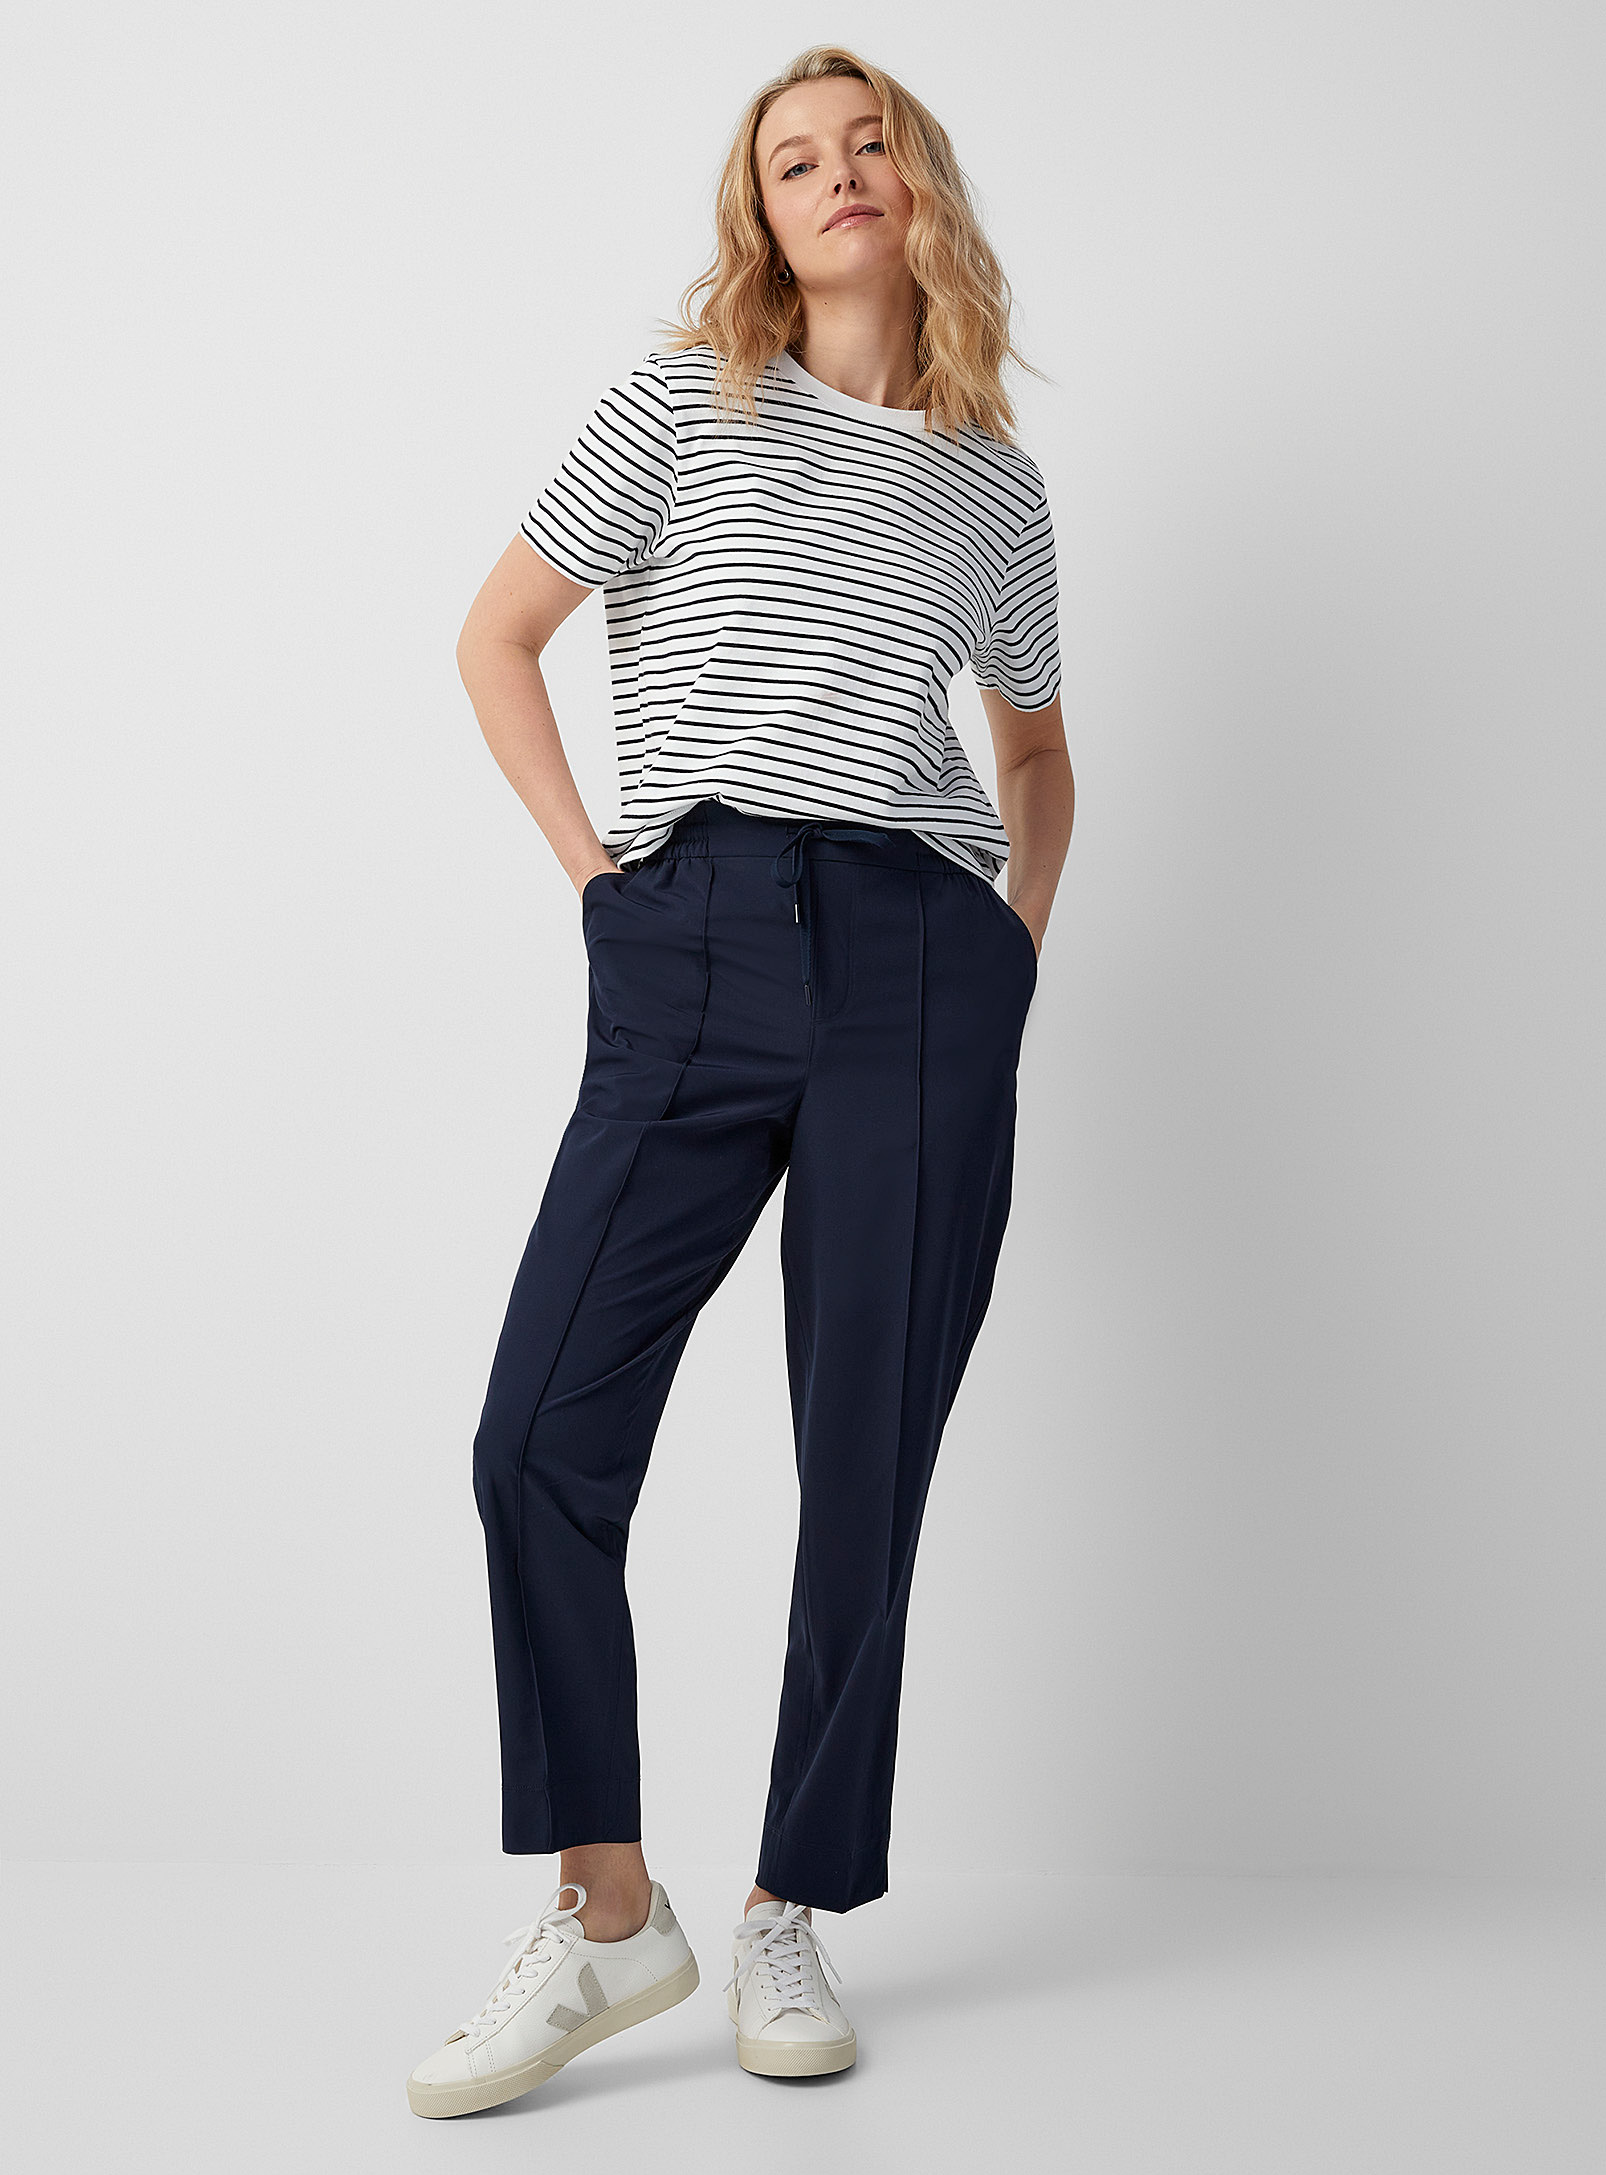 Contemporaine Pintuck Stretch Fabric Pant In Marine Blue